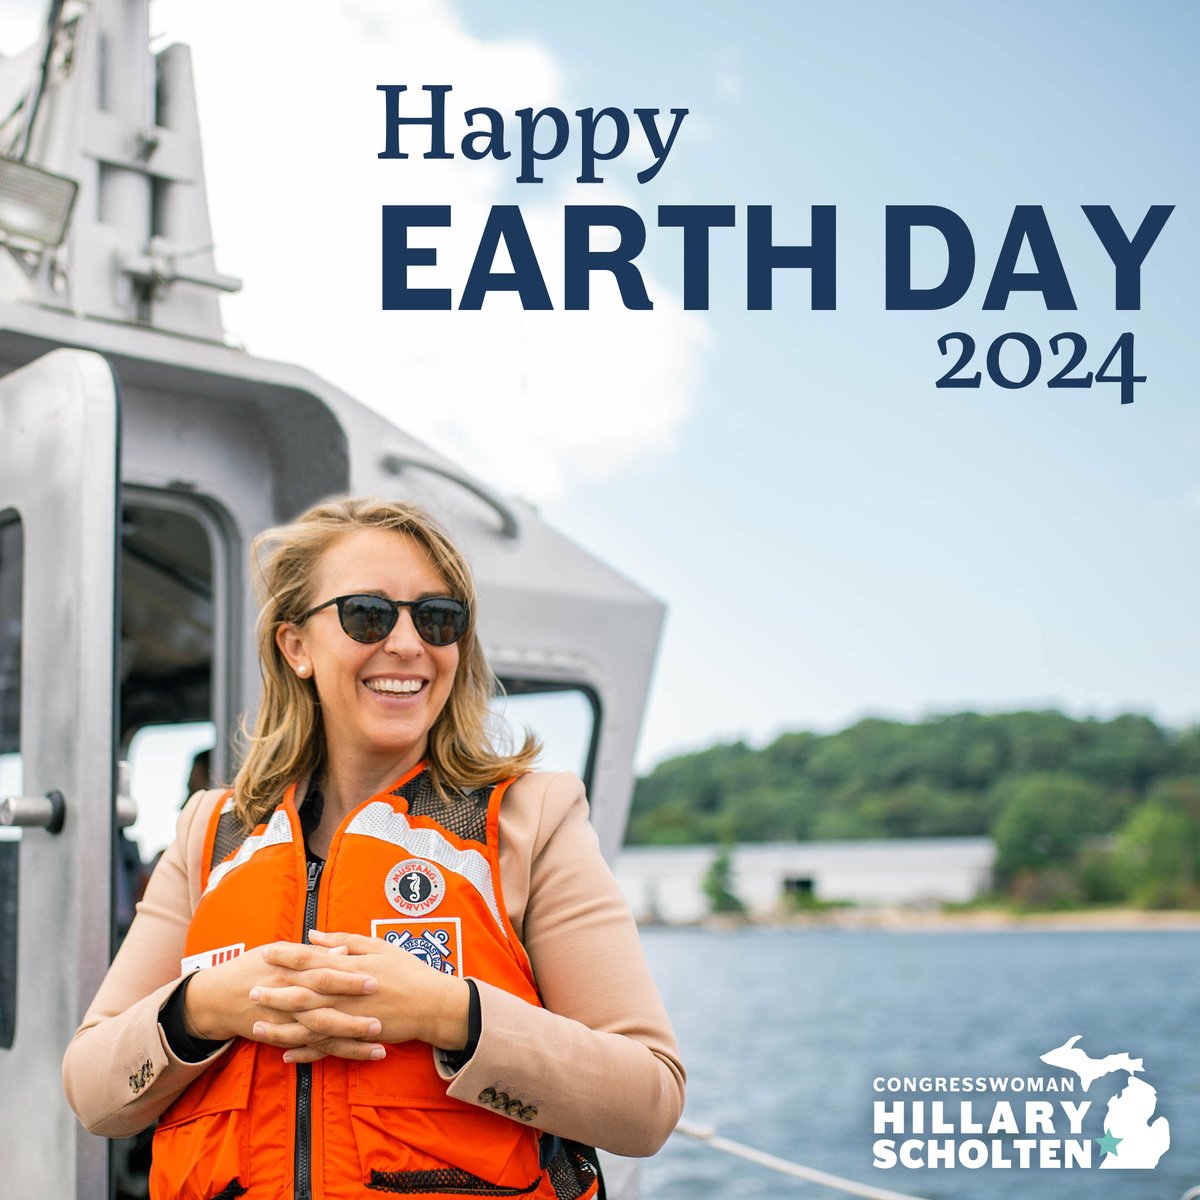 From the beautiful shores of Lake Michigan to the long winding Grand River, I’m committed to protecting and preserving the beauty of West Michigan for generations to come. Happy Earth Day!